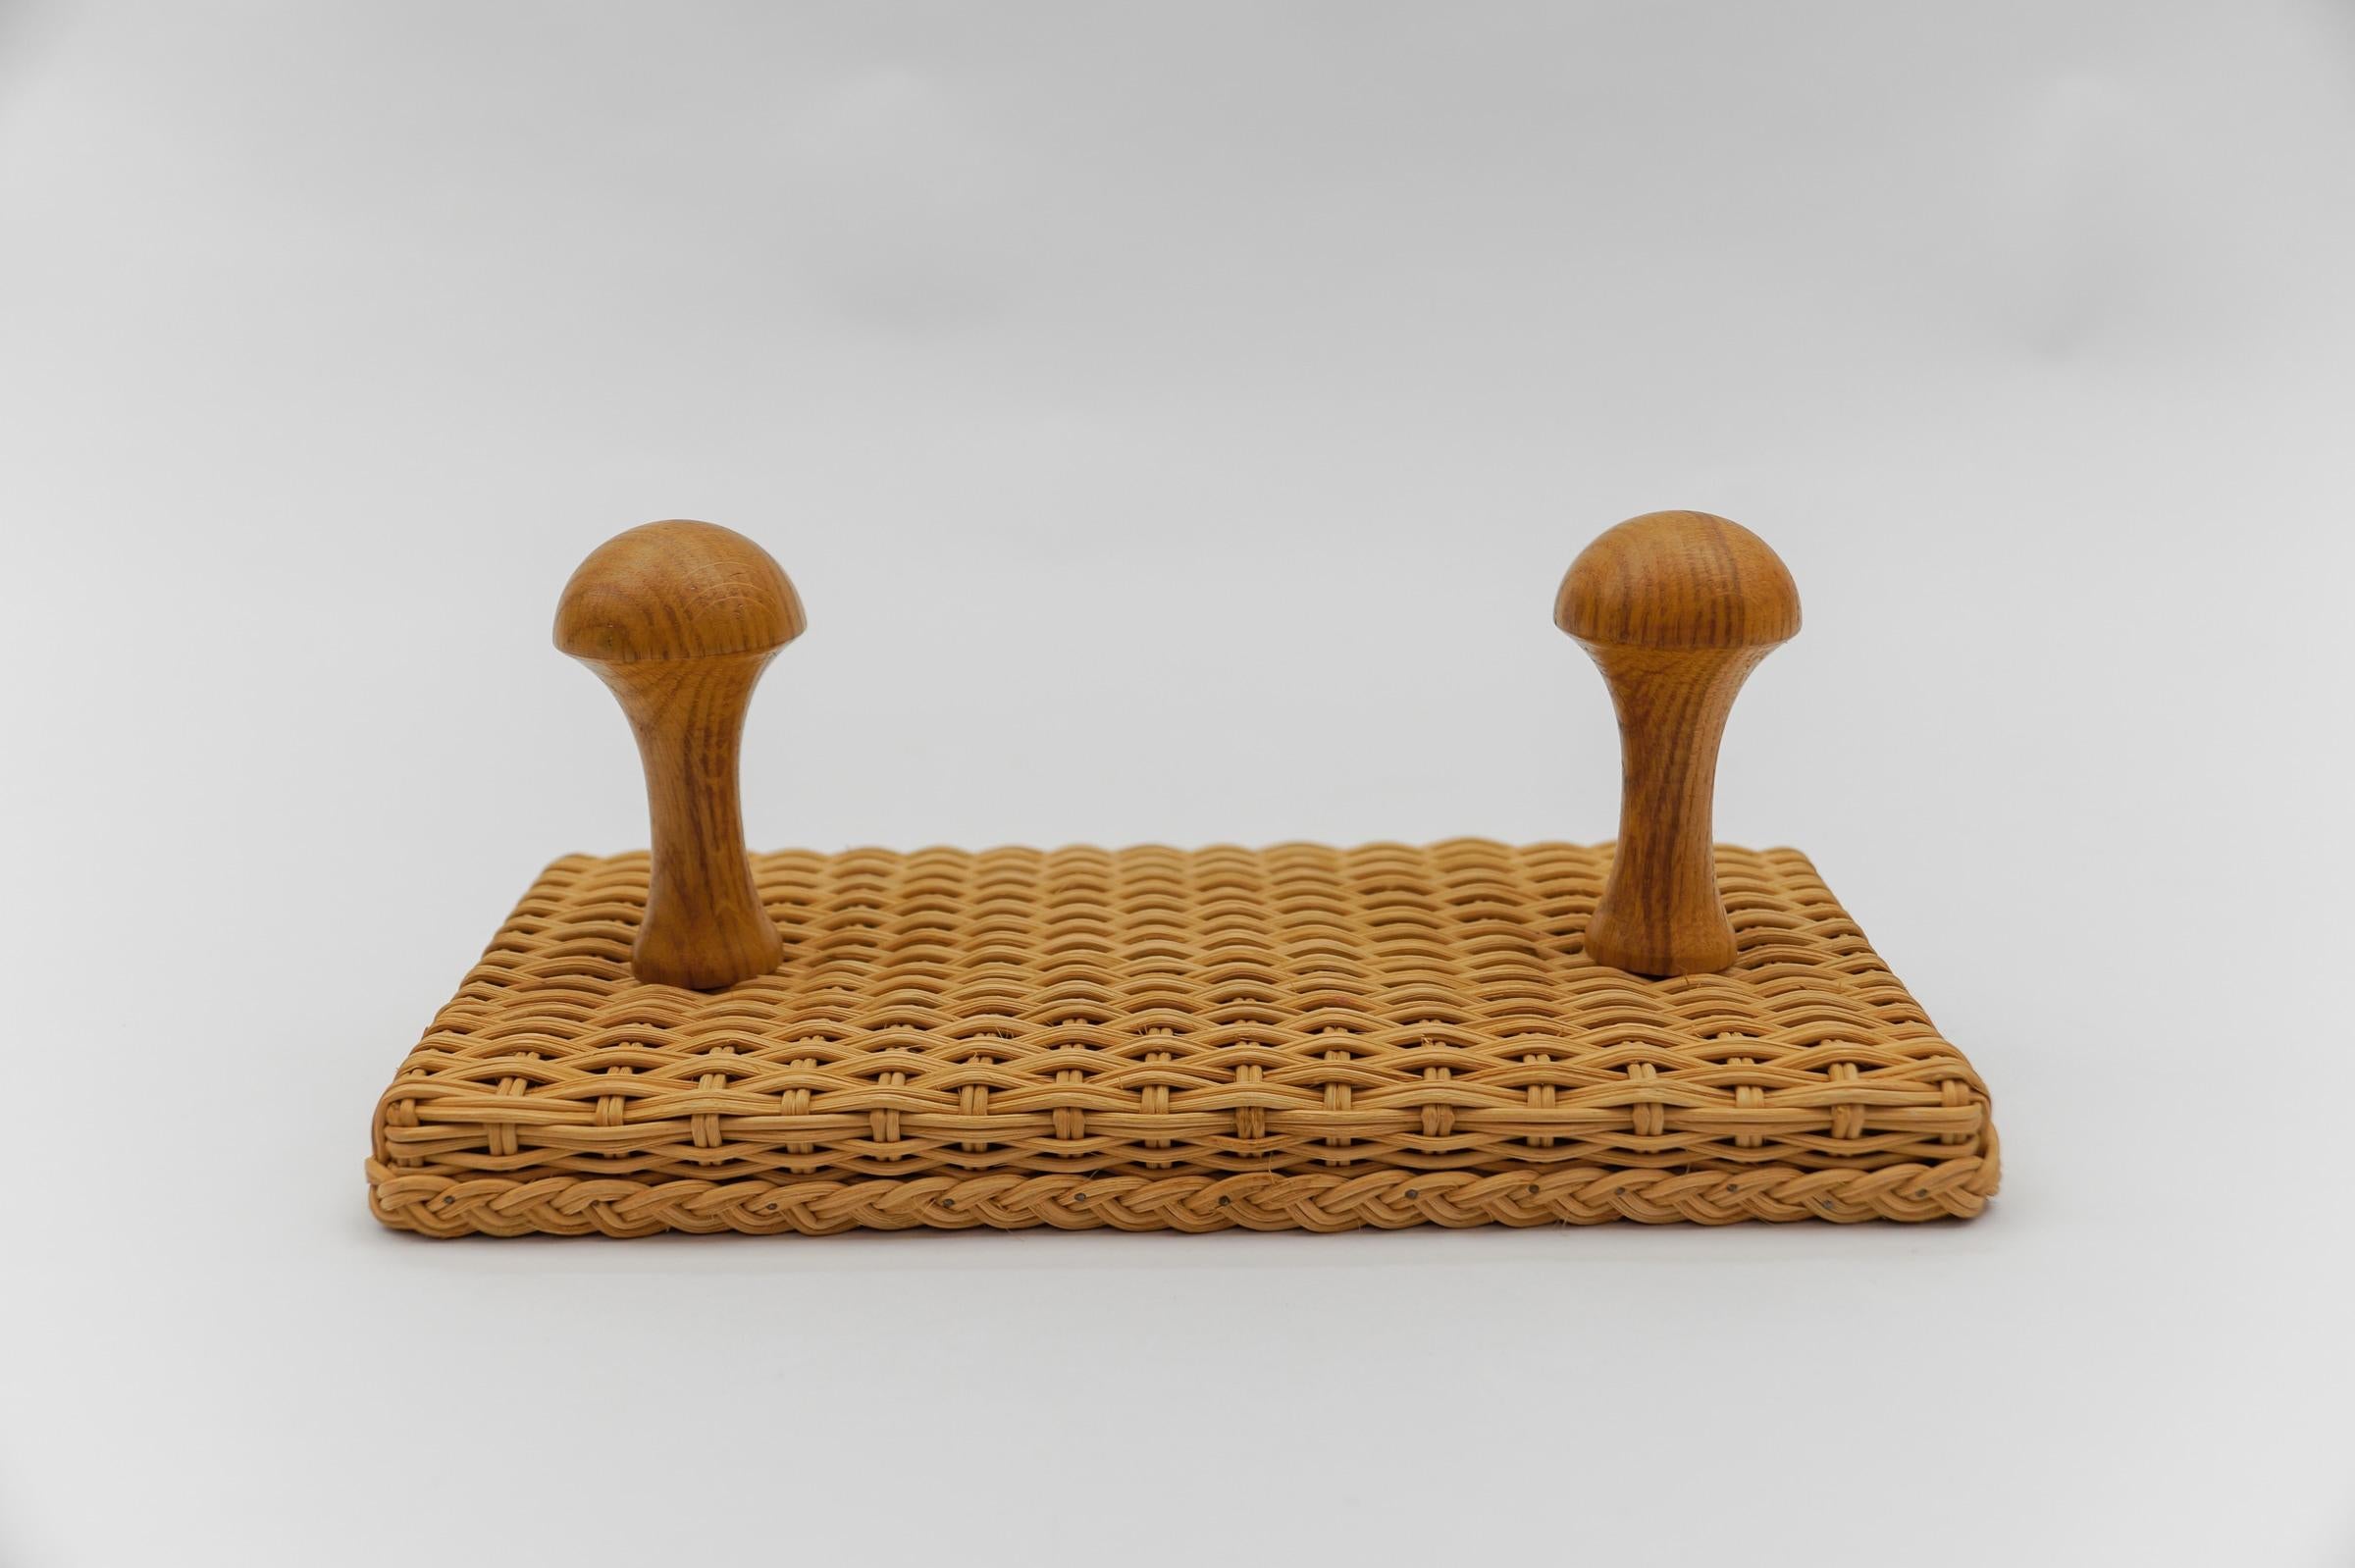 Pair of Double Scandinavian Wall Mounted Coat Hooks in Rattan and Wood, 1960s For Sale 1